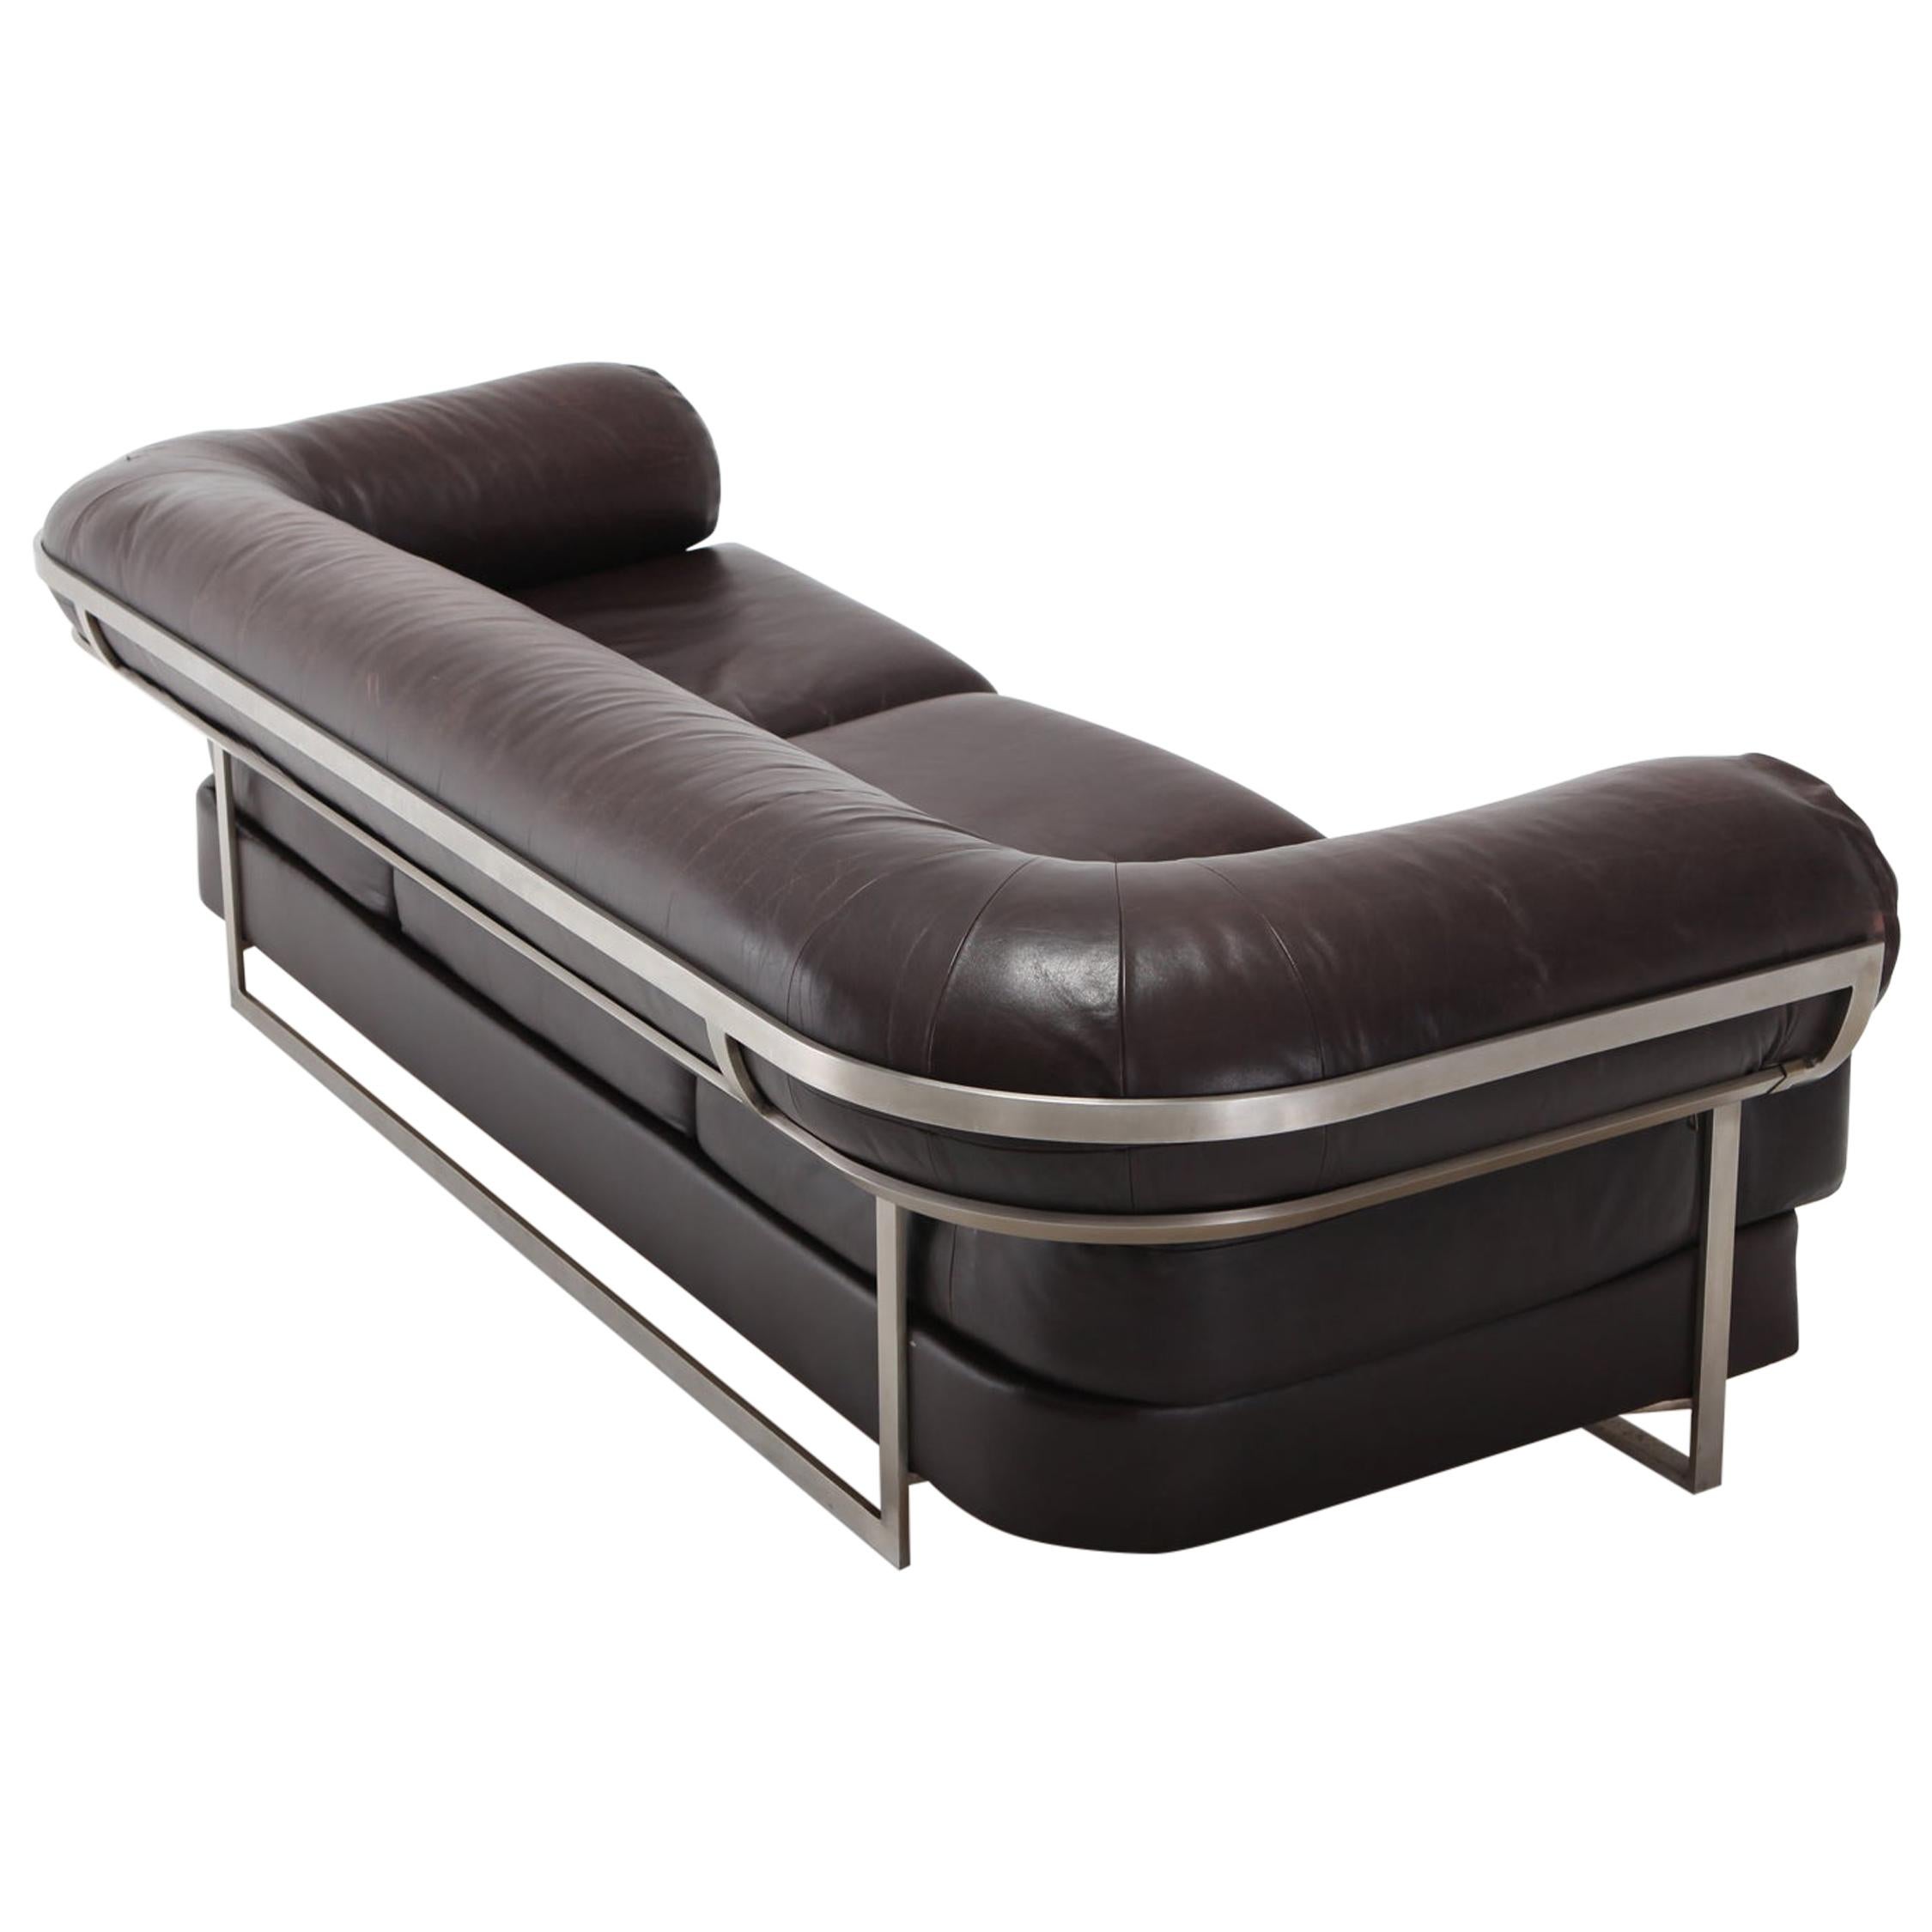 Charpentier Brown Leather 'Apollo' Sofa in Stainless Steel Frame For Sale